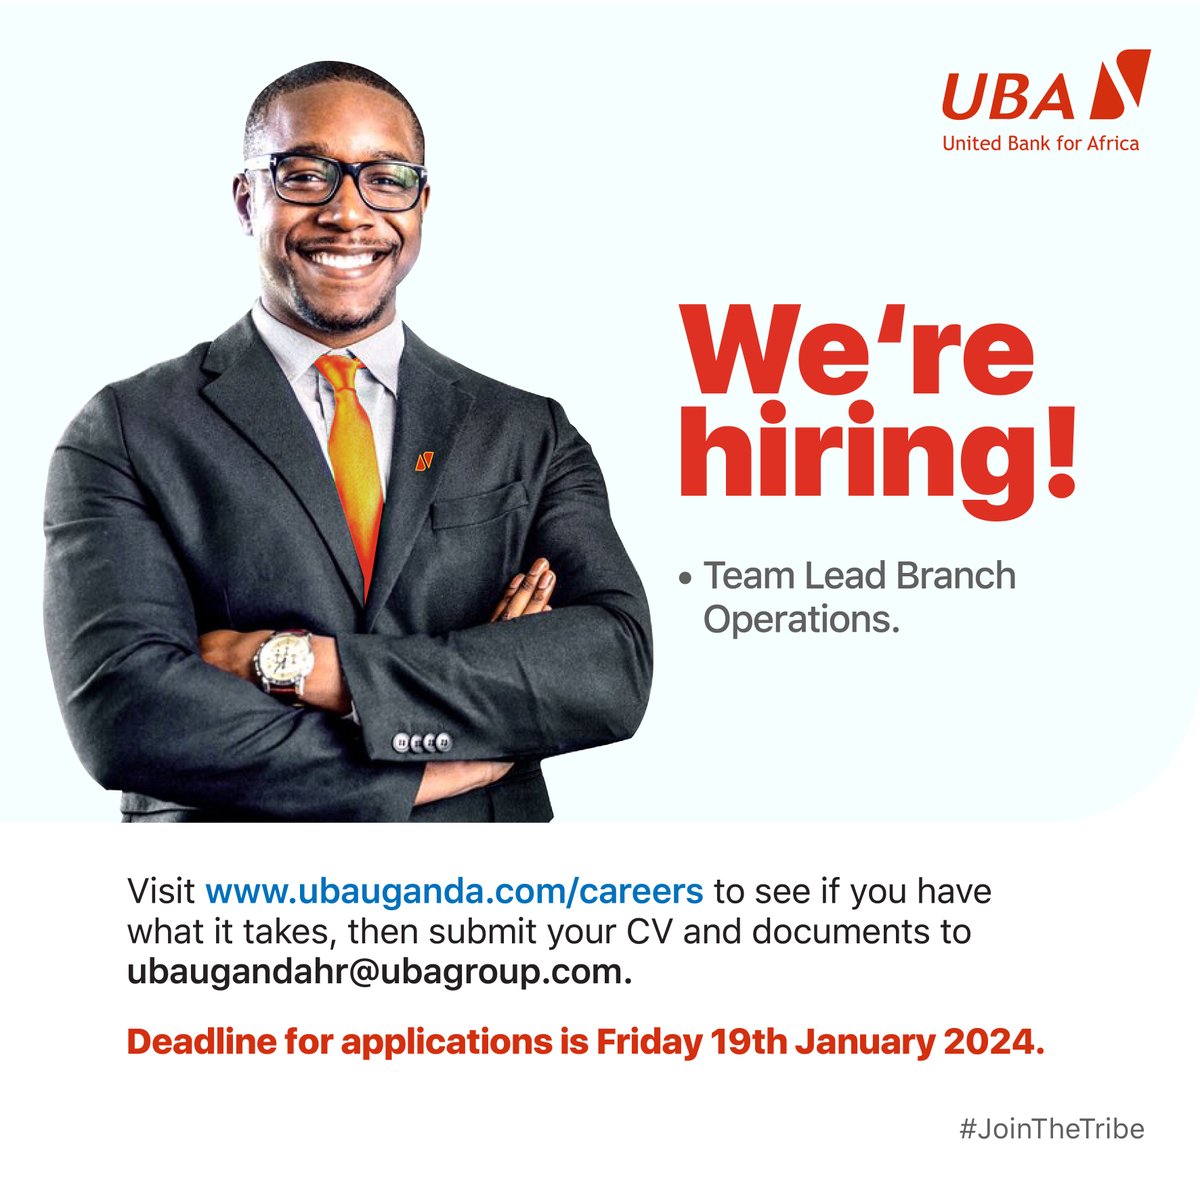 𝐉𝐨𝐢𝐧 𝐭𝐡𝐞 𝐓𝐫𝐢𝐛𝐞. Are you ready to monitor and coordinate the operations across the branch network through the Branch Operations teams? We are looking for you. Read more: ubauganda.com/careers/ Deadline: 19th January 2024. #Hiring #JoinTheTribe